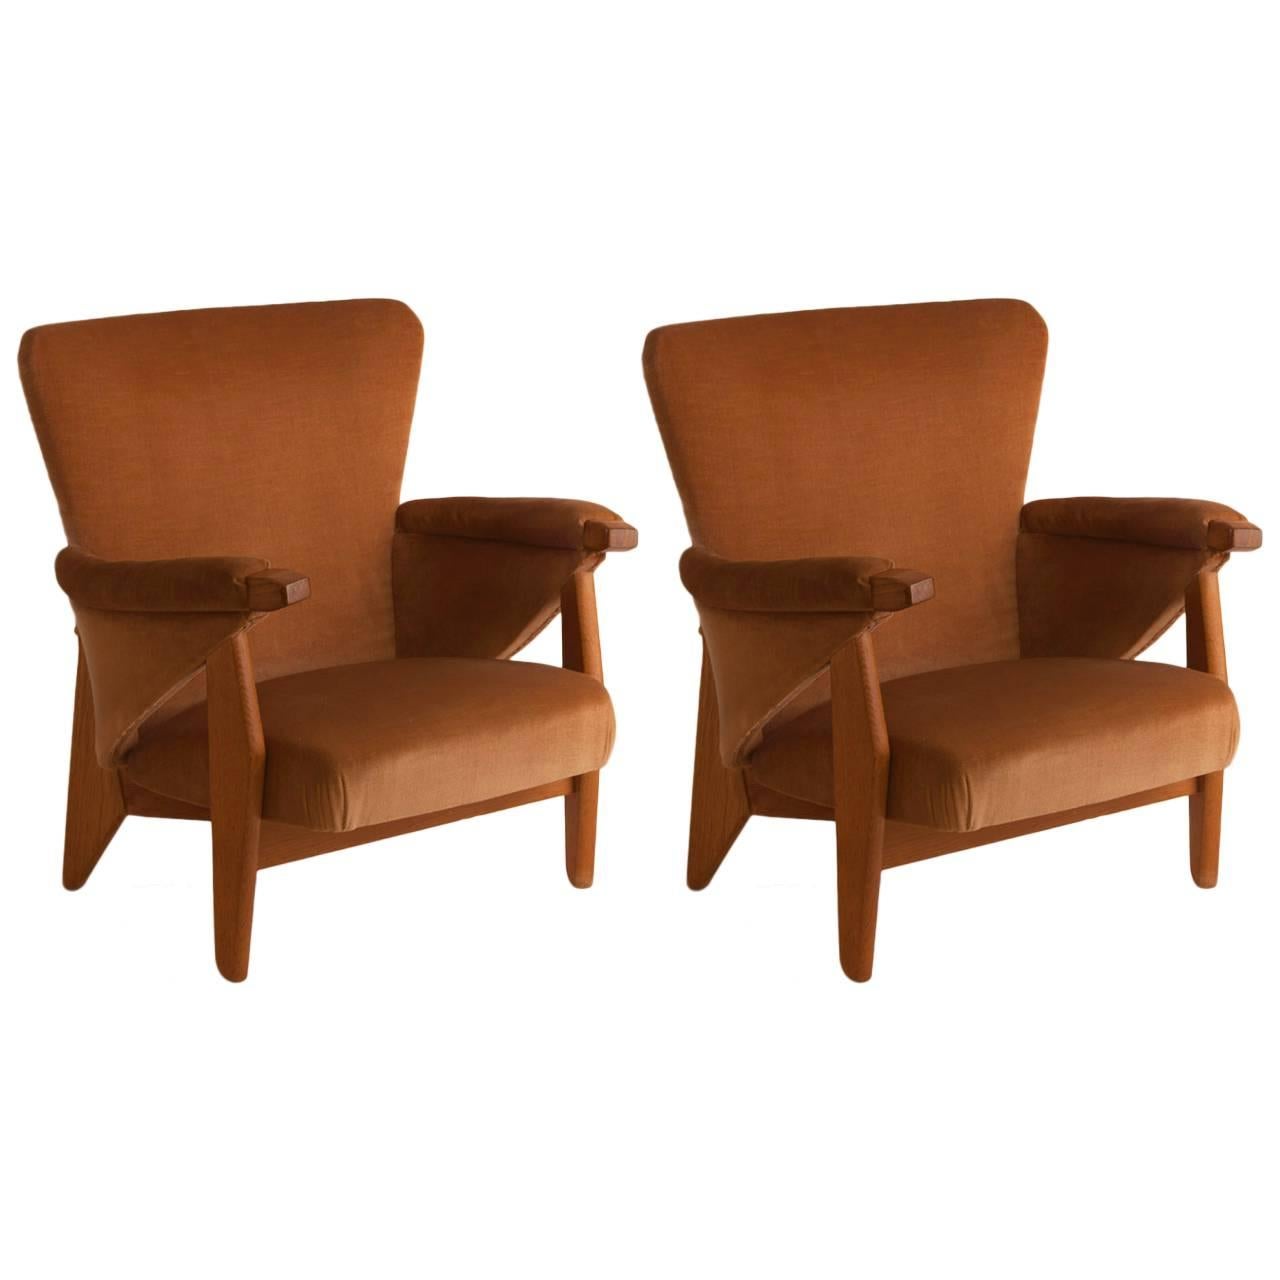 Pair of French Oak Chairs